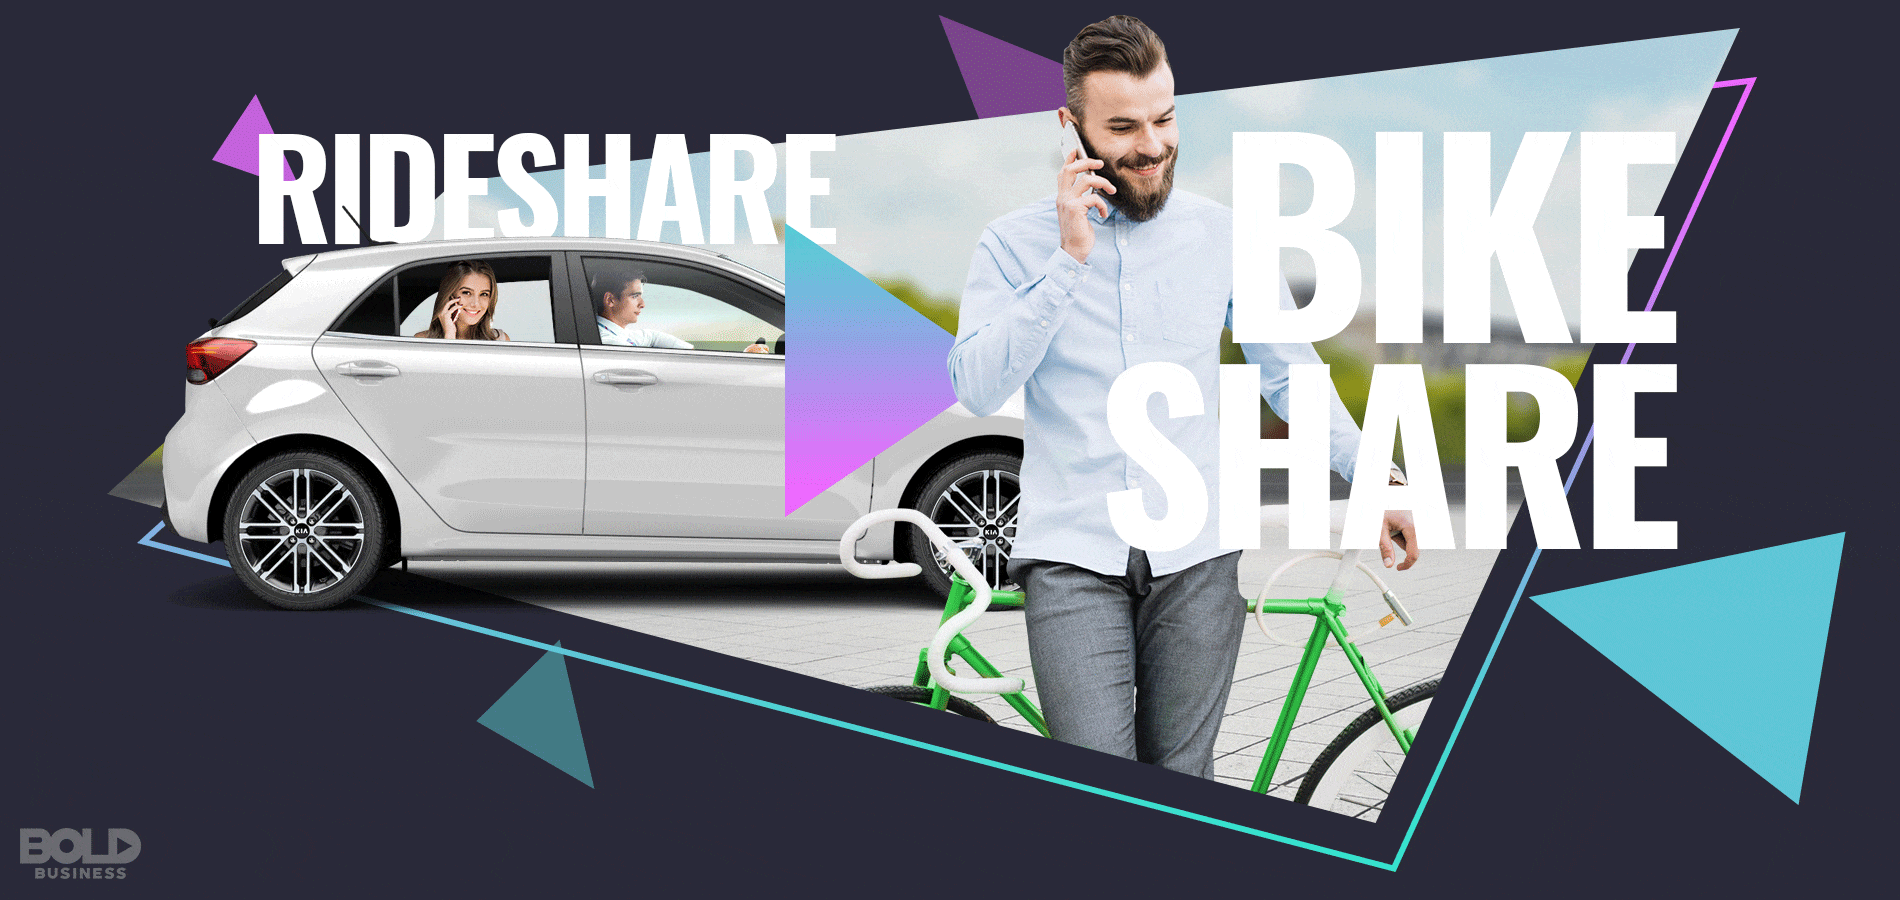 Integrated Bike and Ride Share is Here